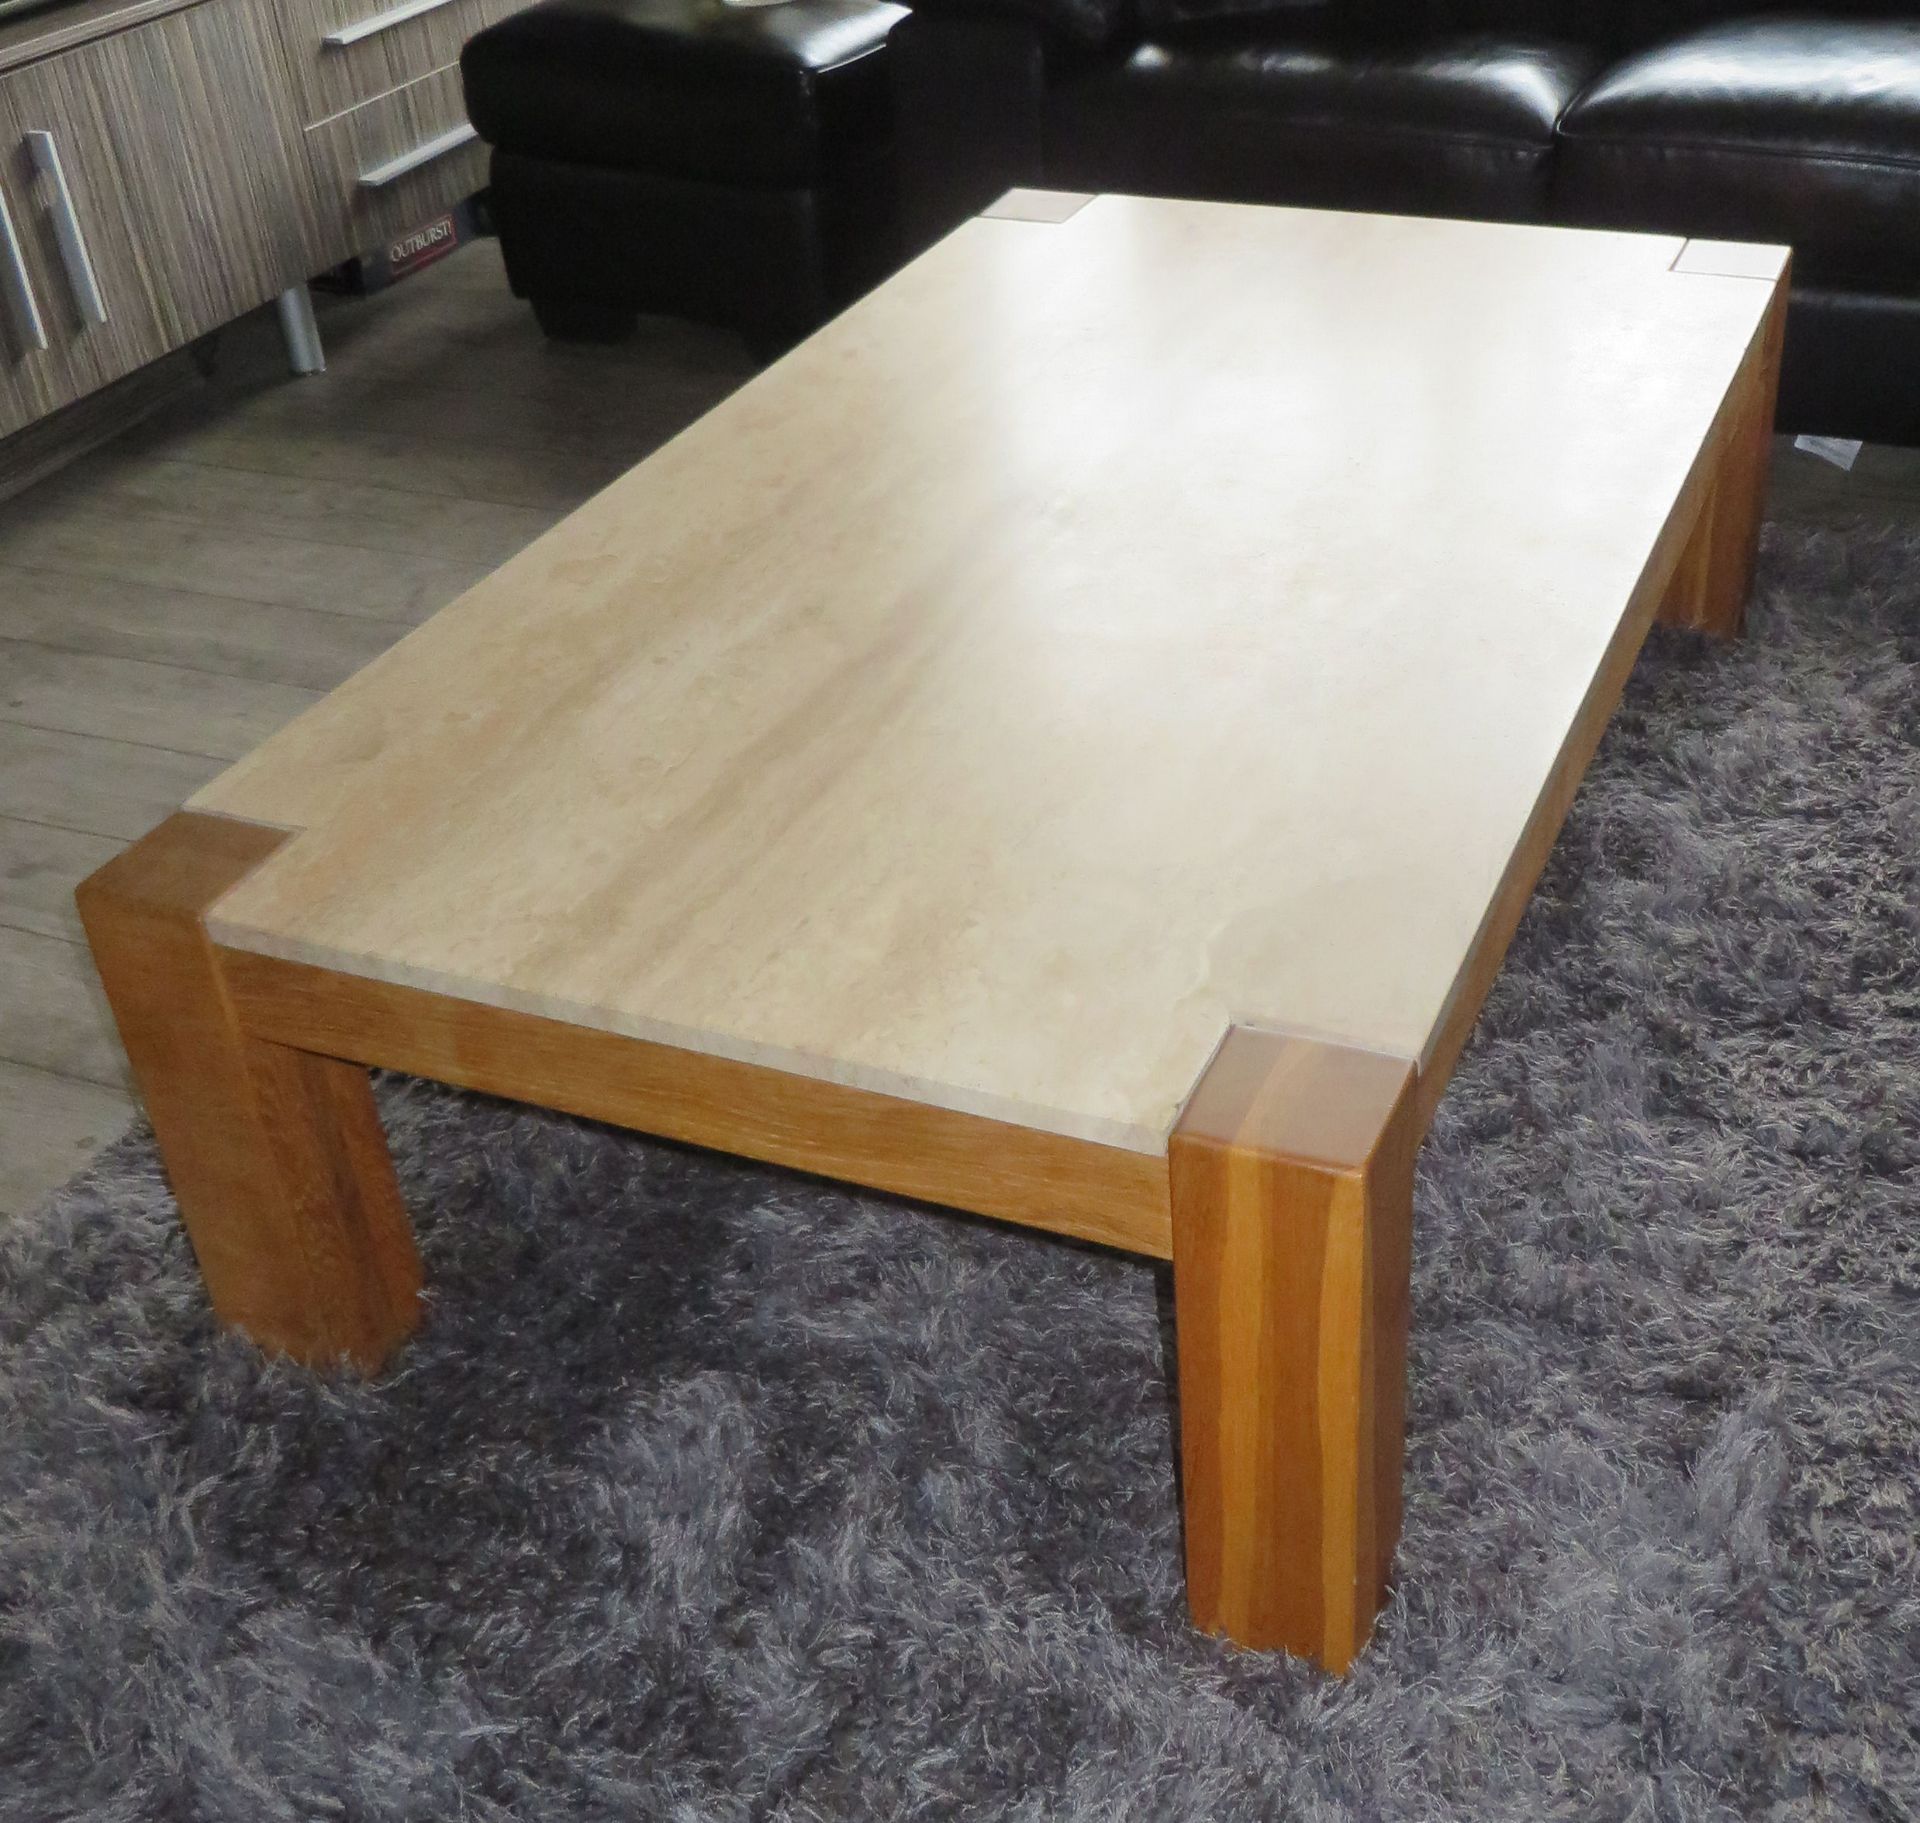 1 x Contemporary Oak and Travertine Coffee Table - CL175 - Location: Bradshaw BL2 - NO VAT - Image 5 of 9